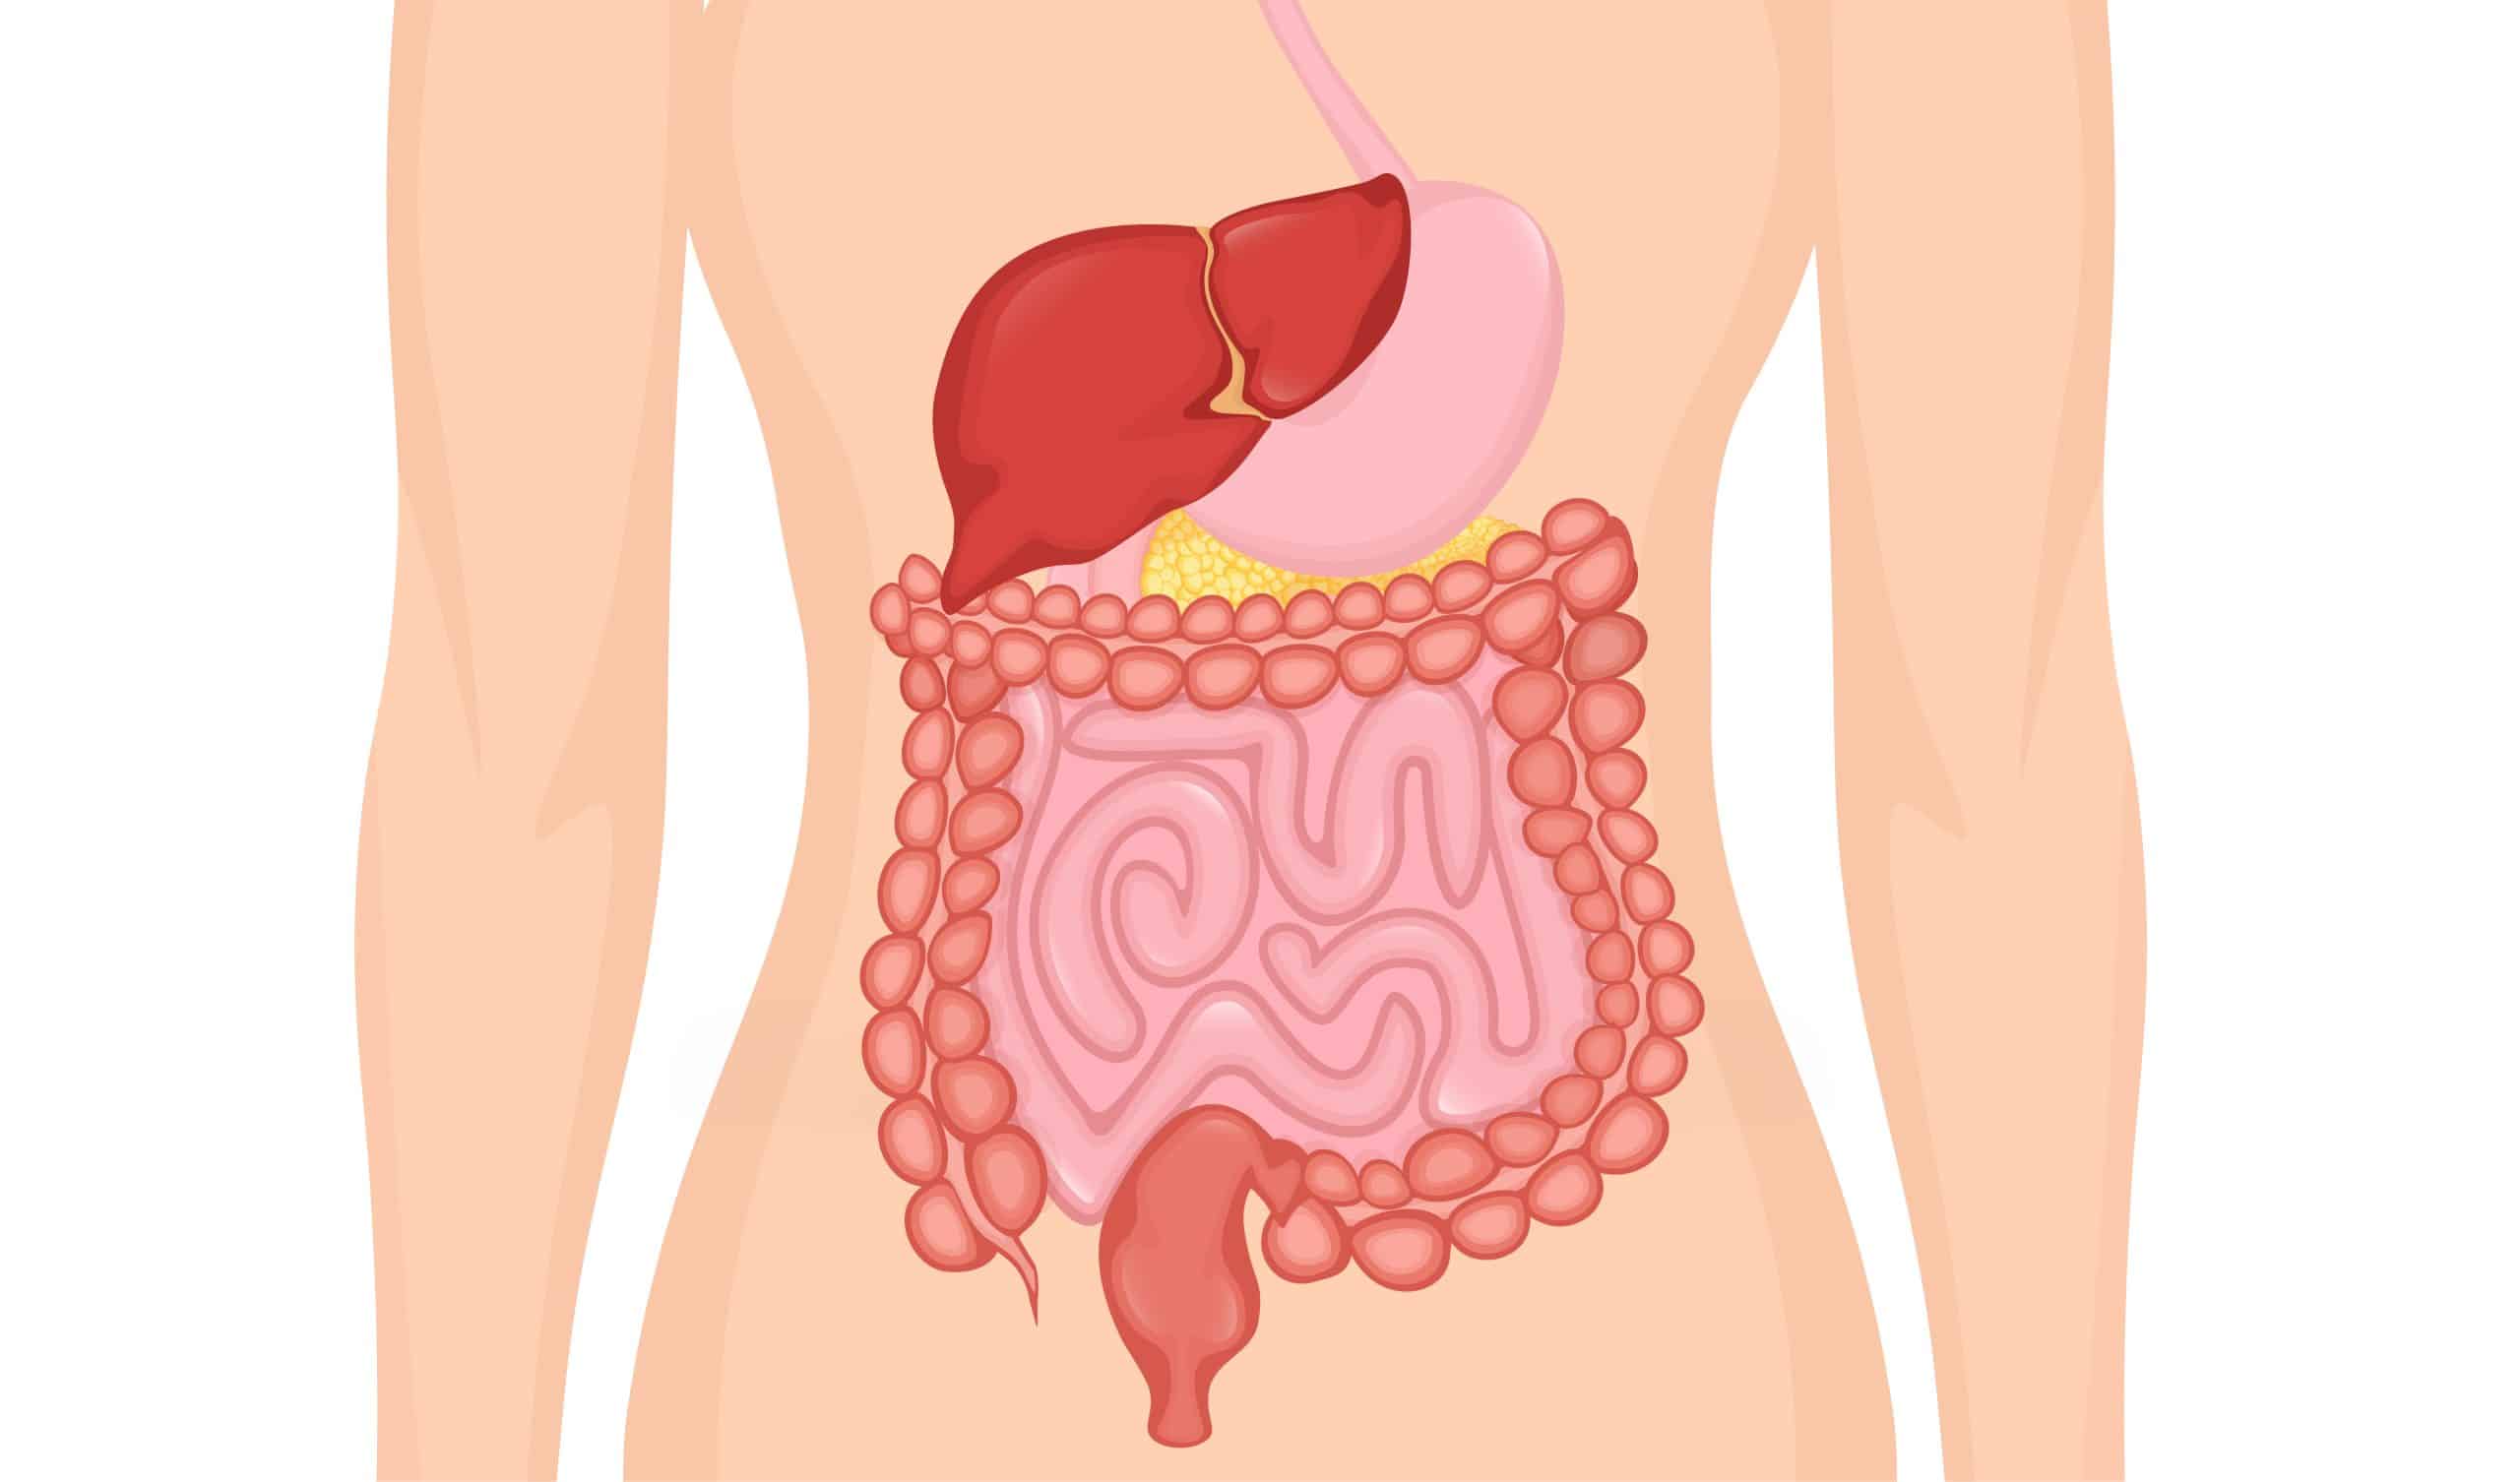 Illustration of the human digestive system including the stomach, intestines, colon, etc